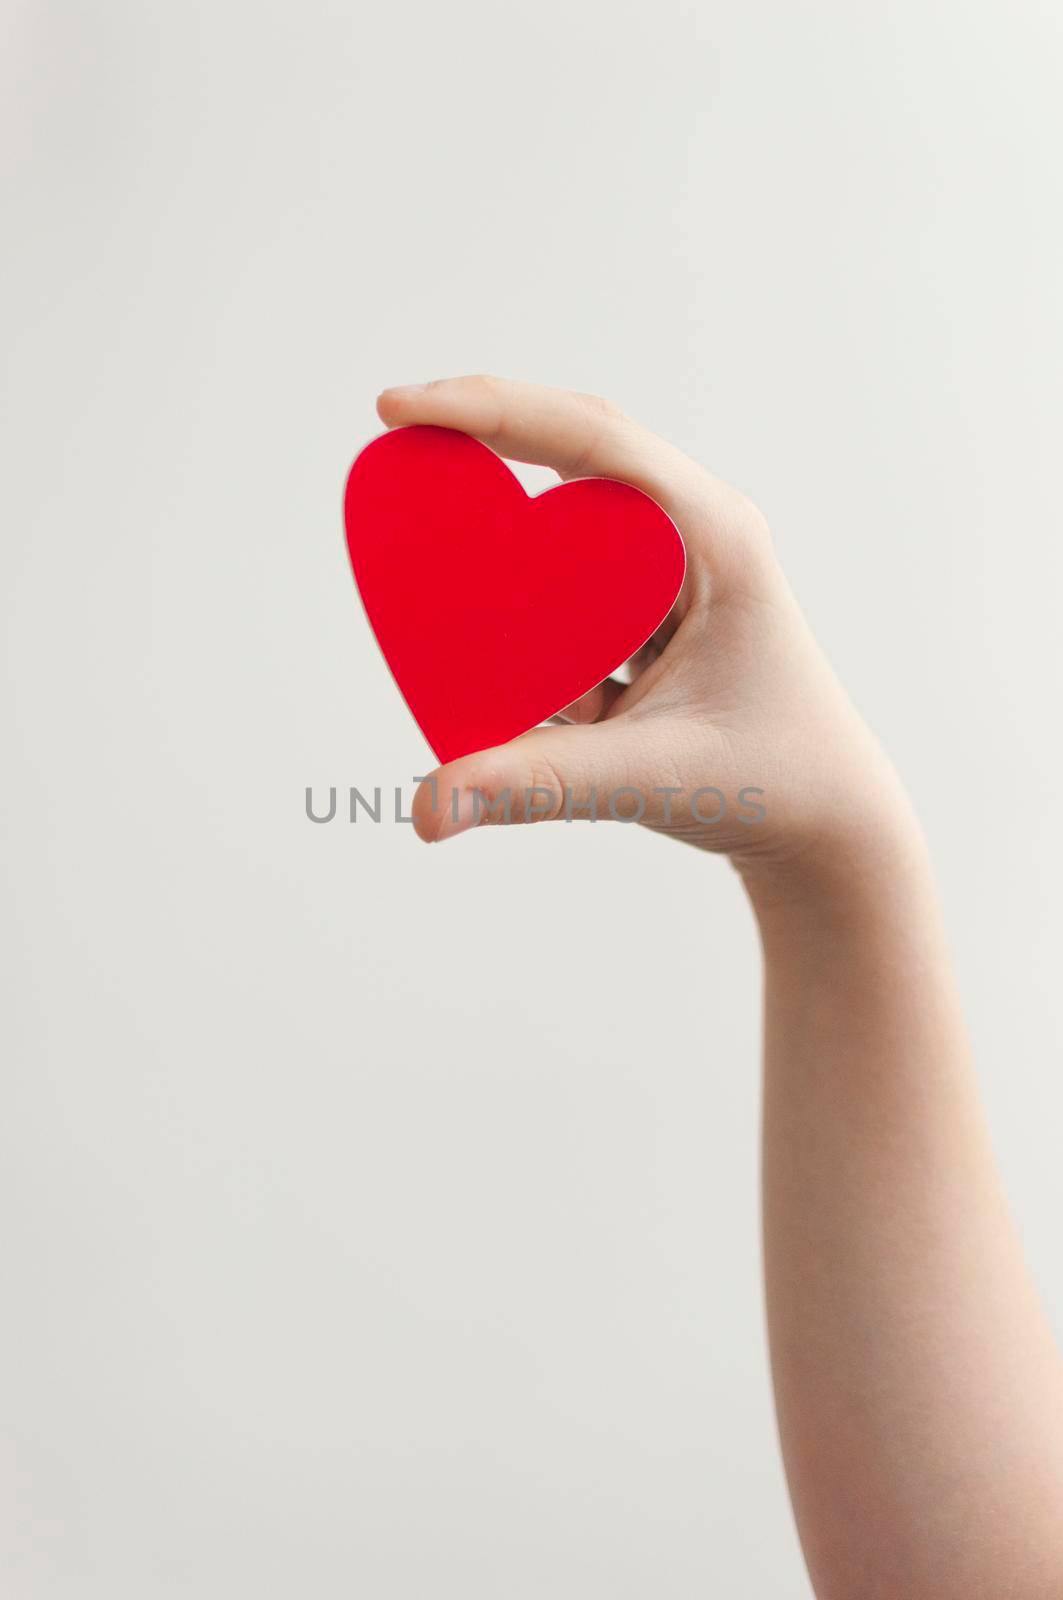 Child's hand holding red heart over white background by inxti